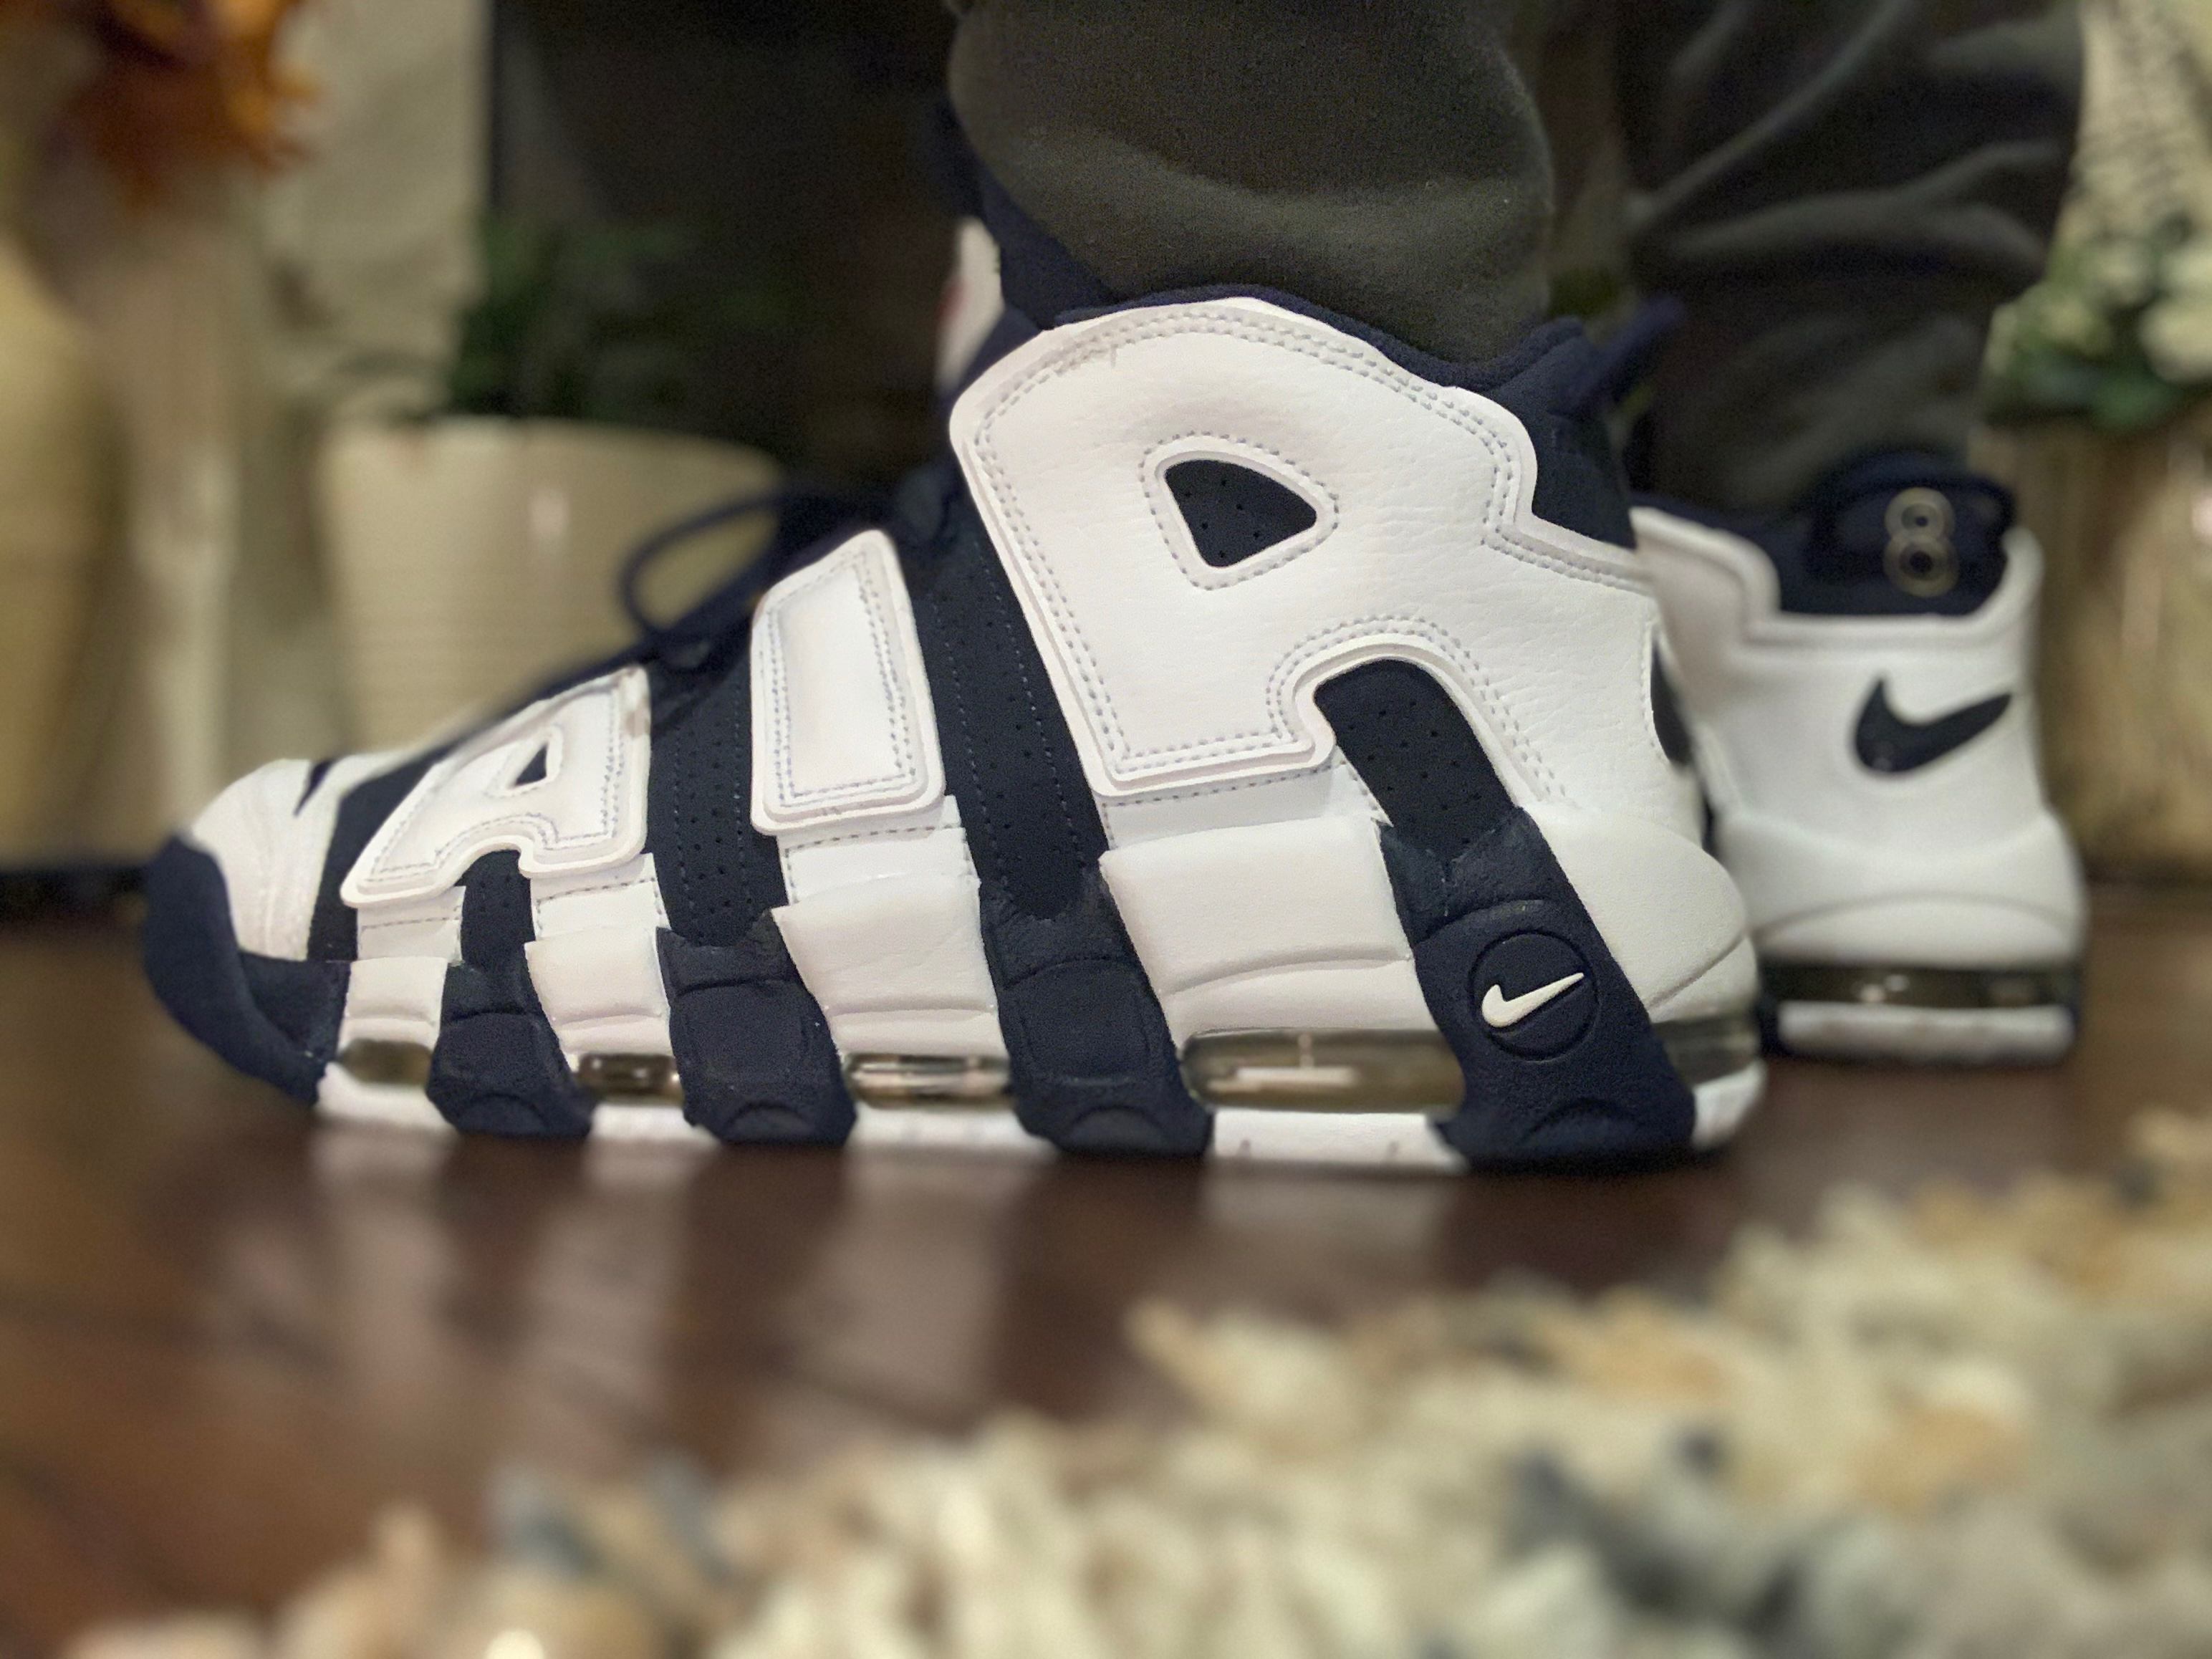 air more uptempo olympic 216